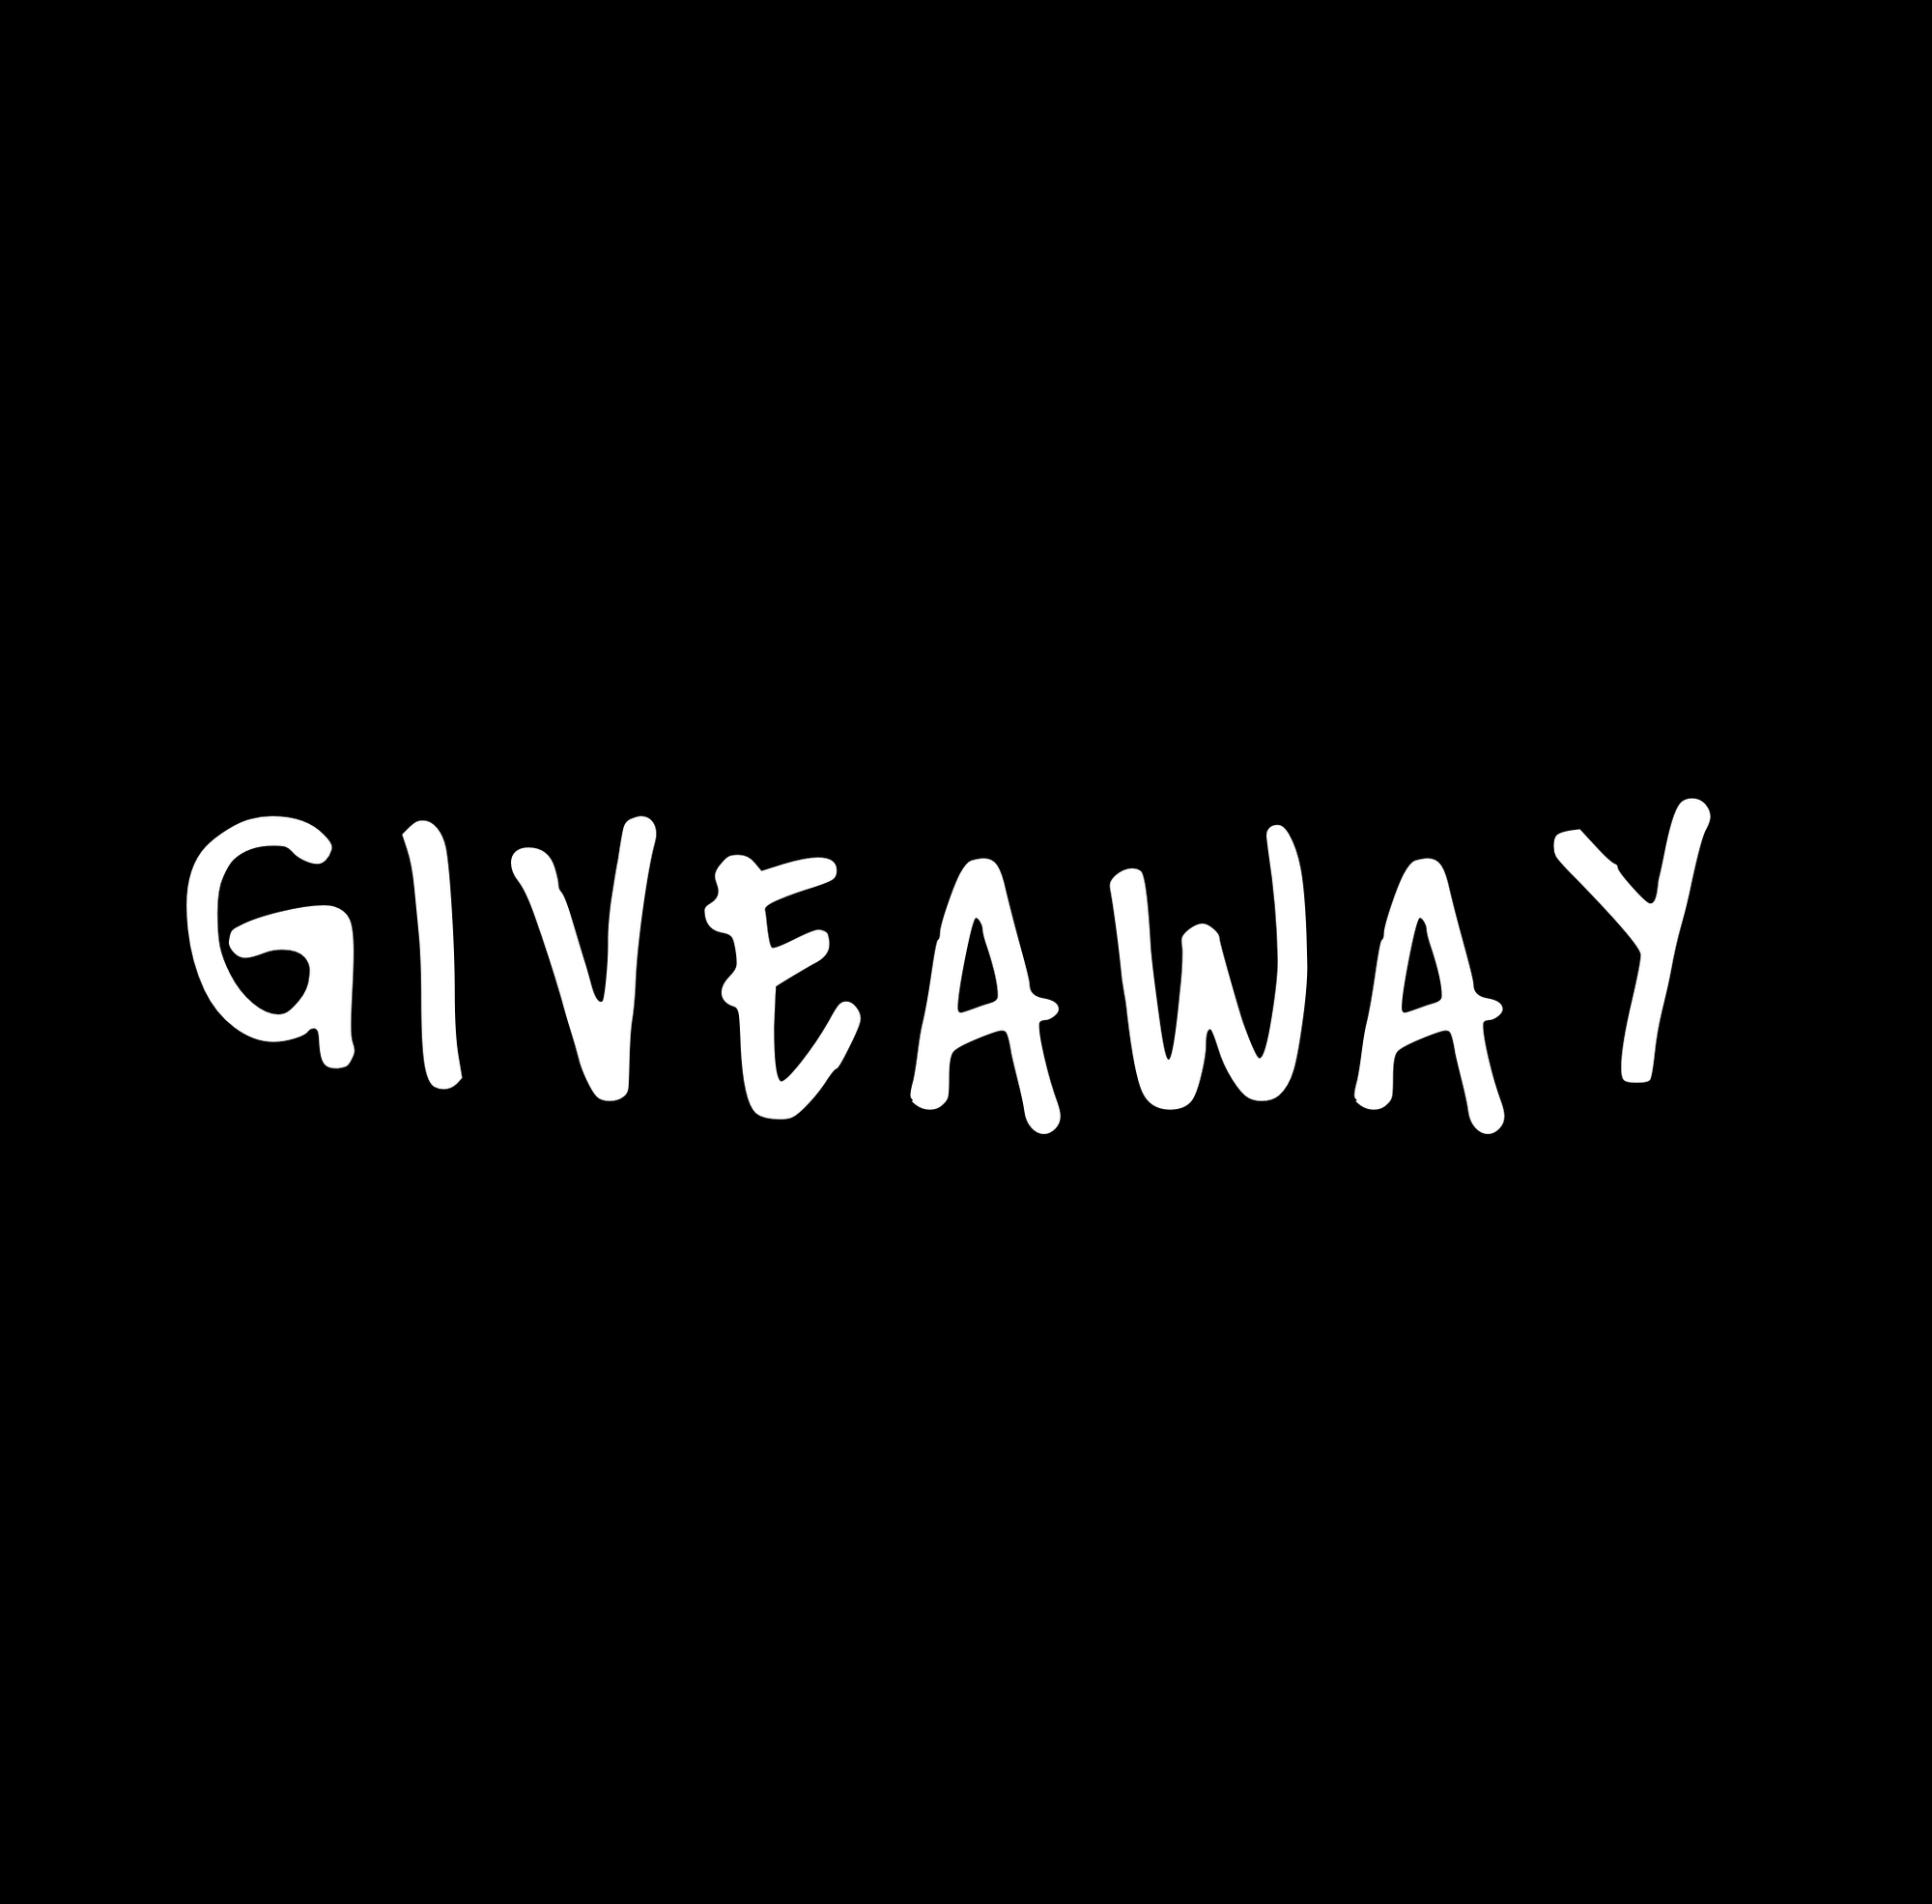 GIVEAWAY ENTRY